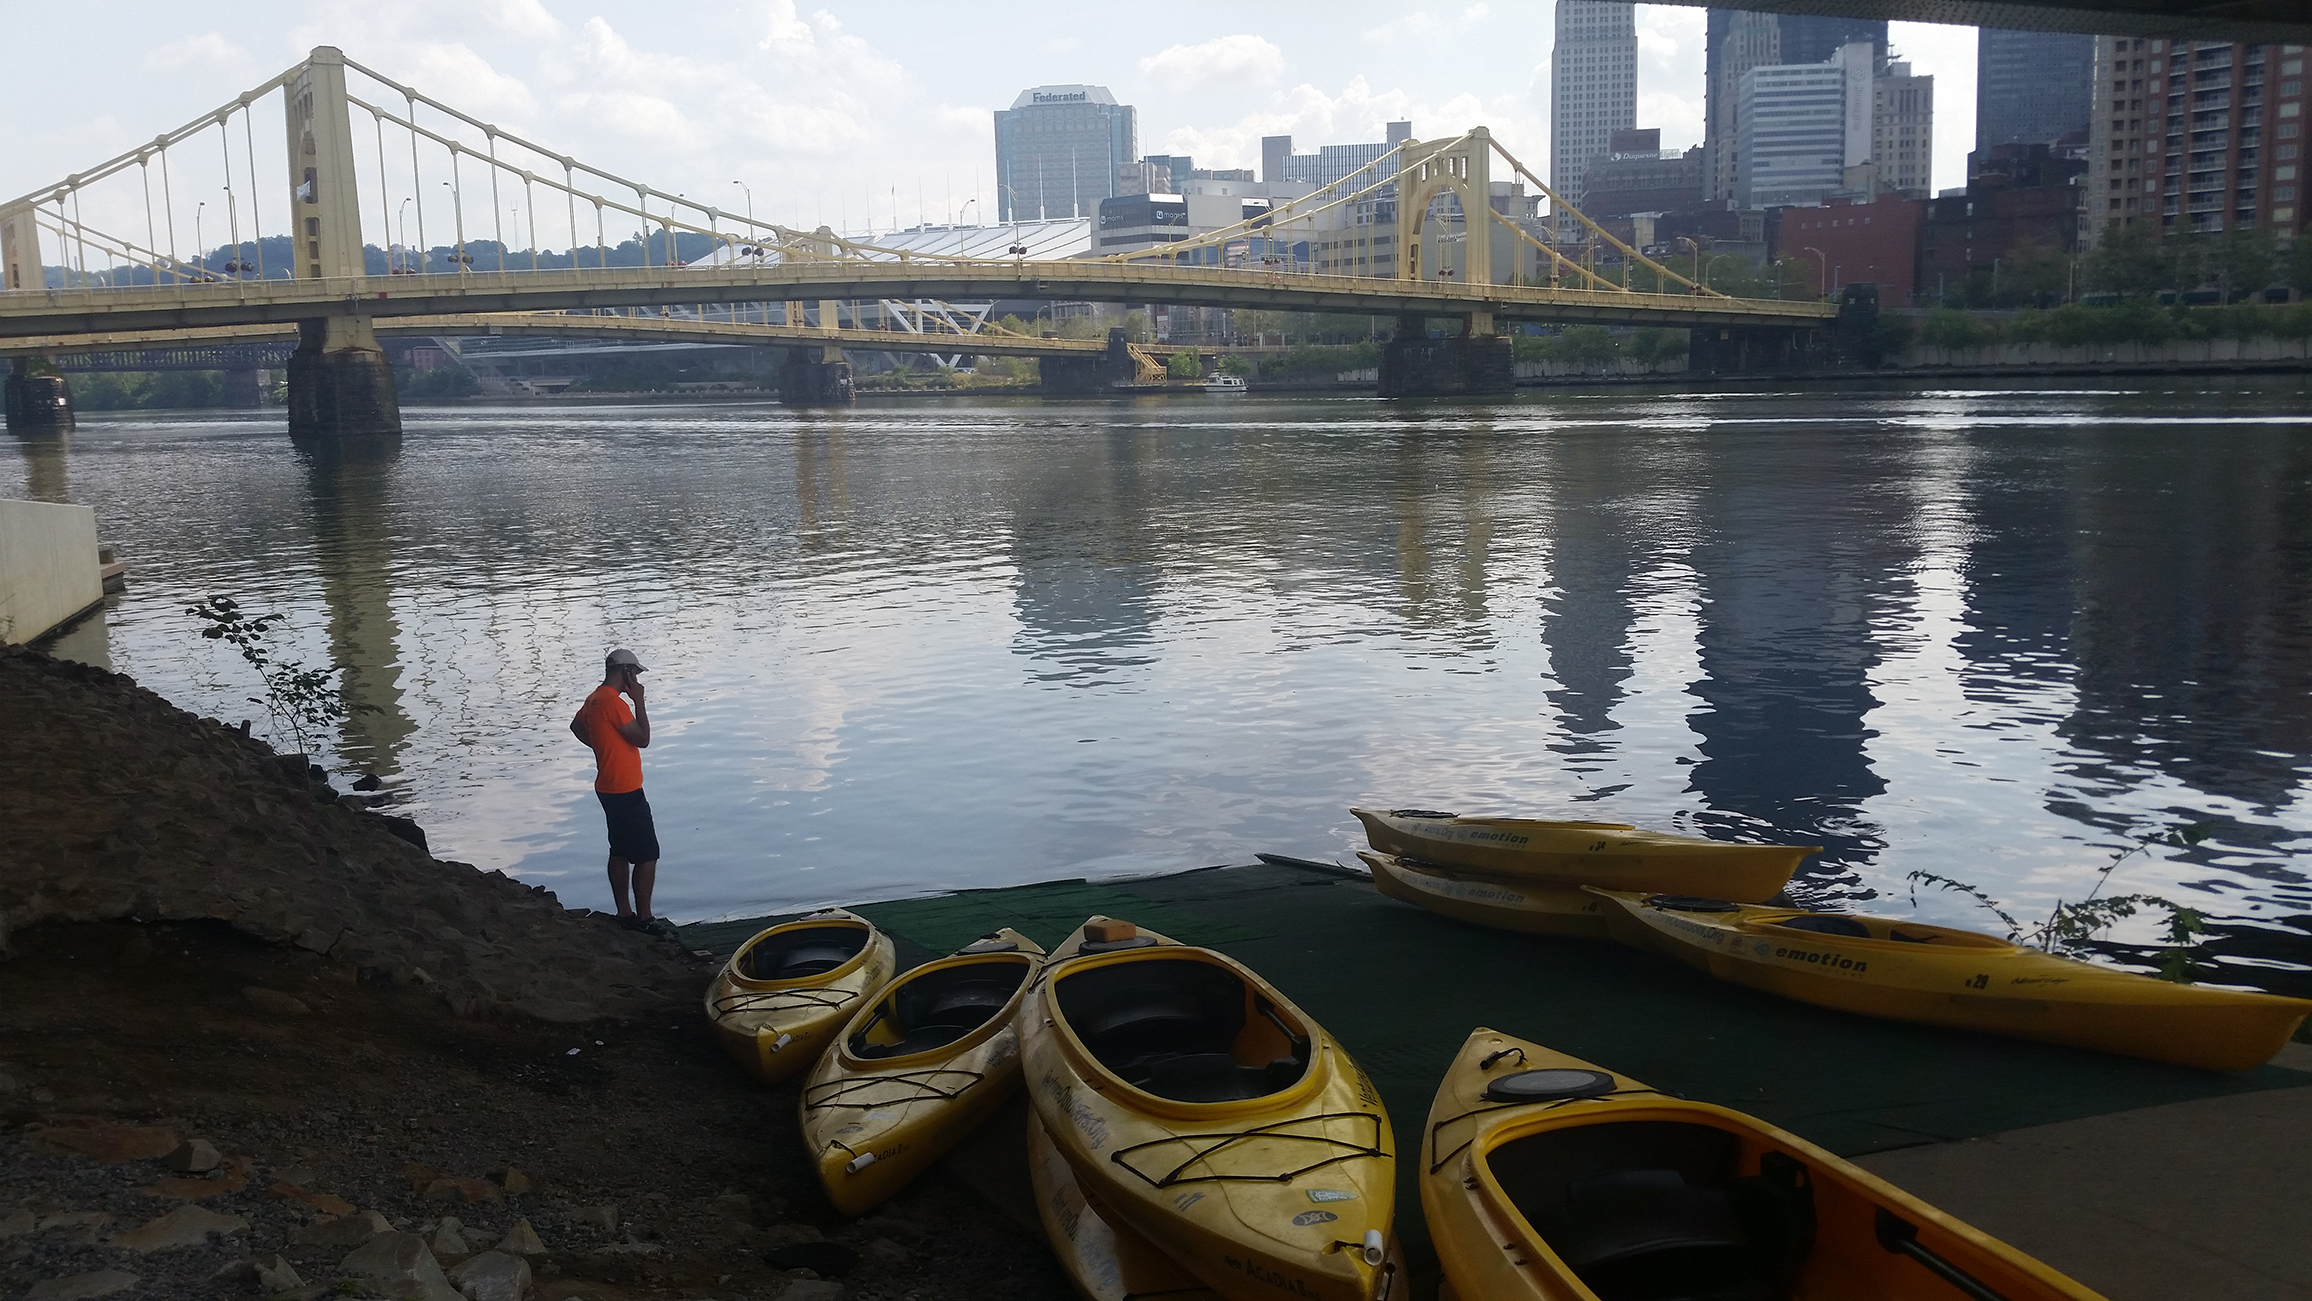 Alex Keim sets up our kayaks at Kayak Pittsburgh - North Shore. Check out that beautiful skyline in the distance.